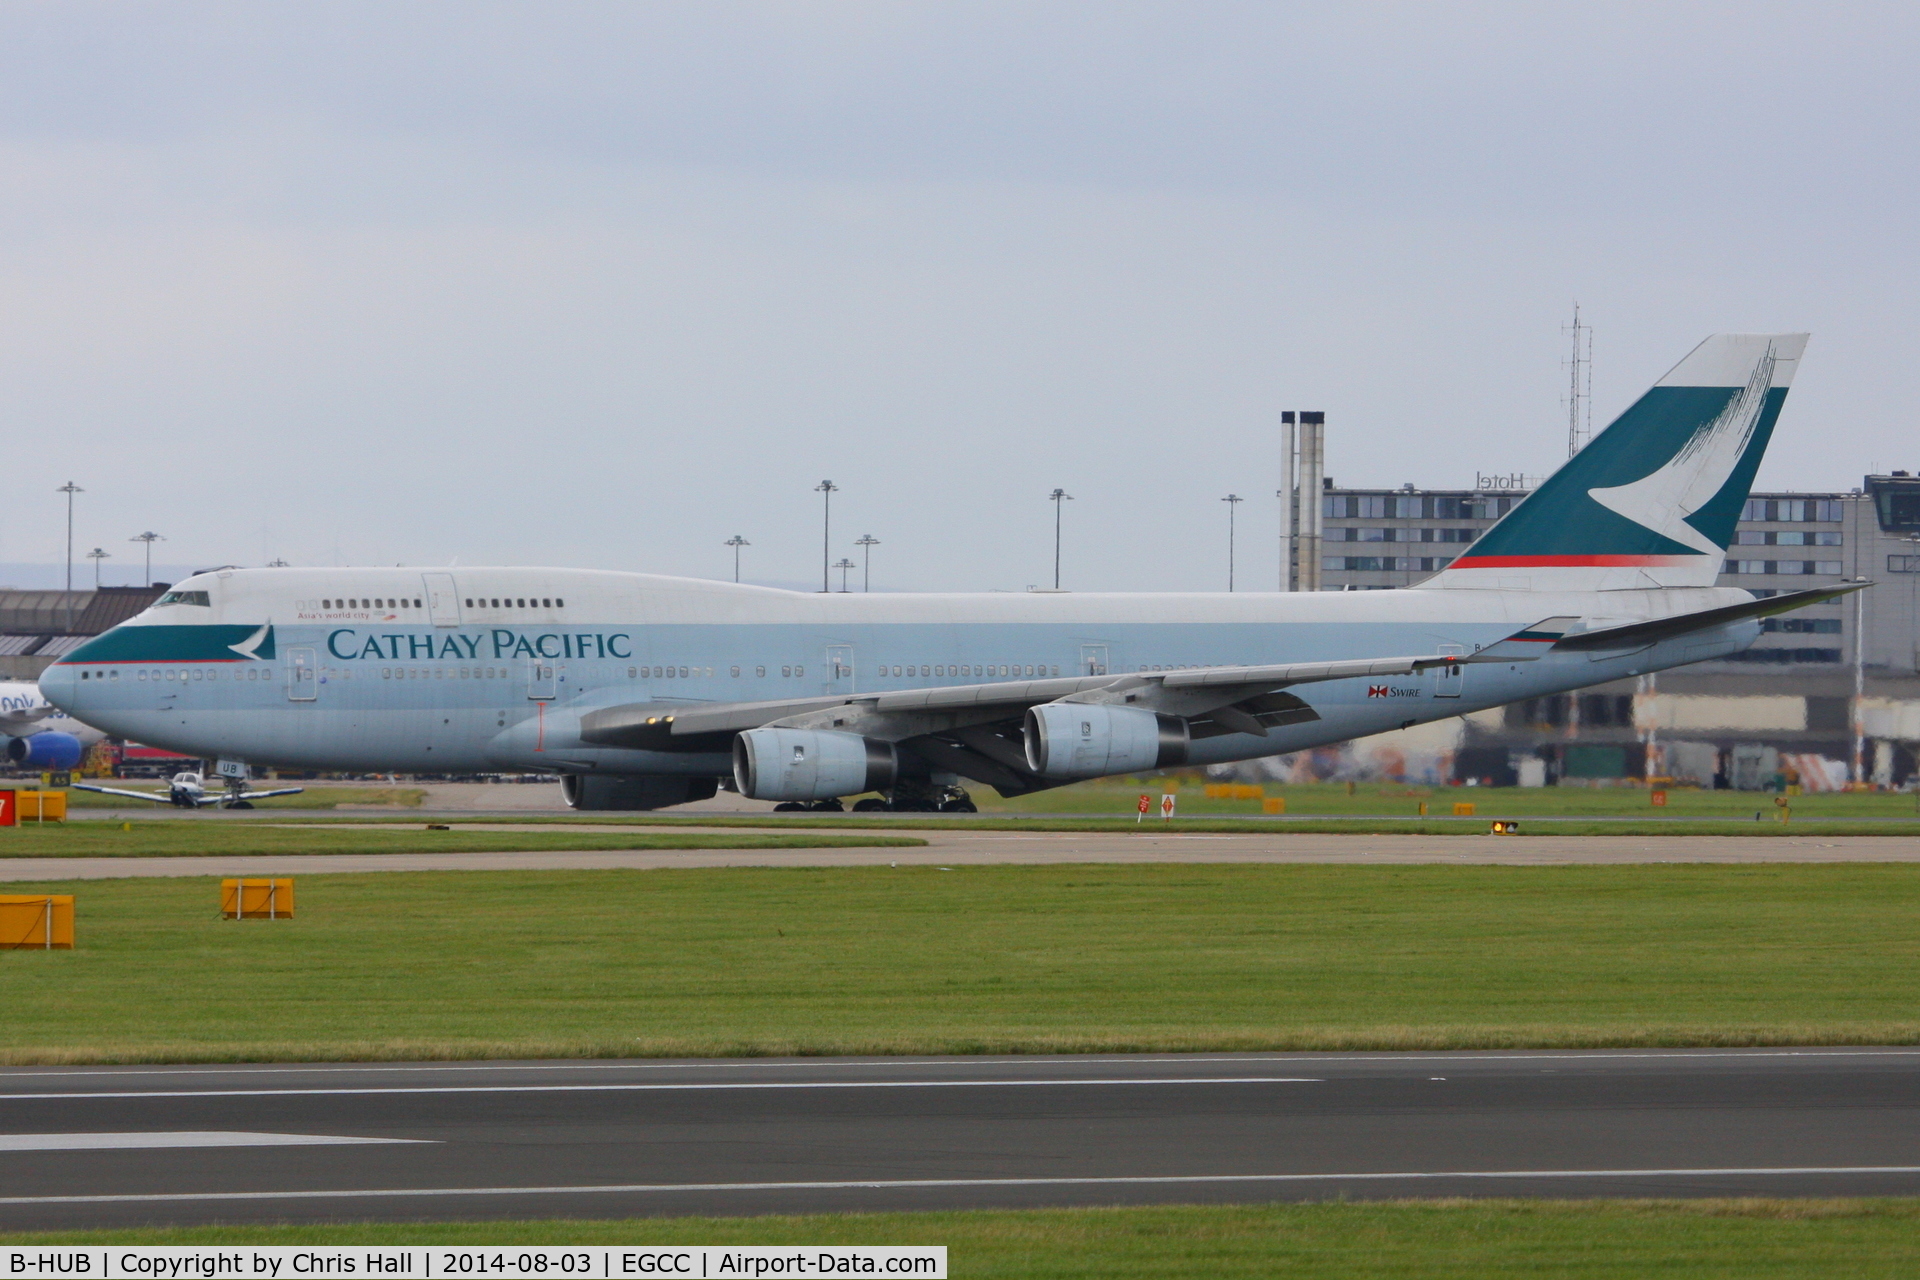 B-HUB, 1992 Boeing 747-467 C/N 25873, penultimate flight for this Cathay Pacific B747 before flying to Bruntingthorpe to be scrapped